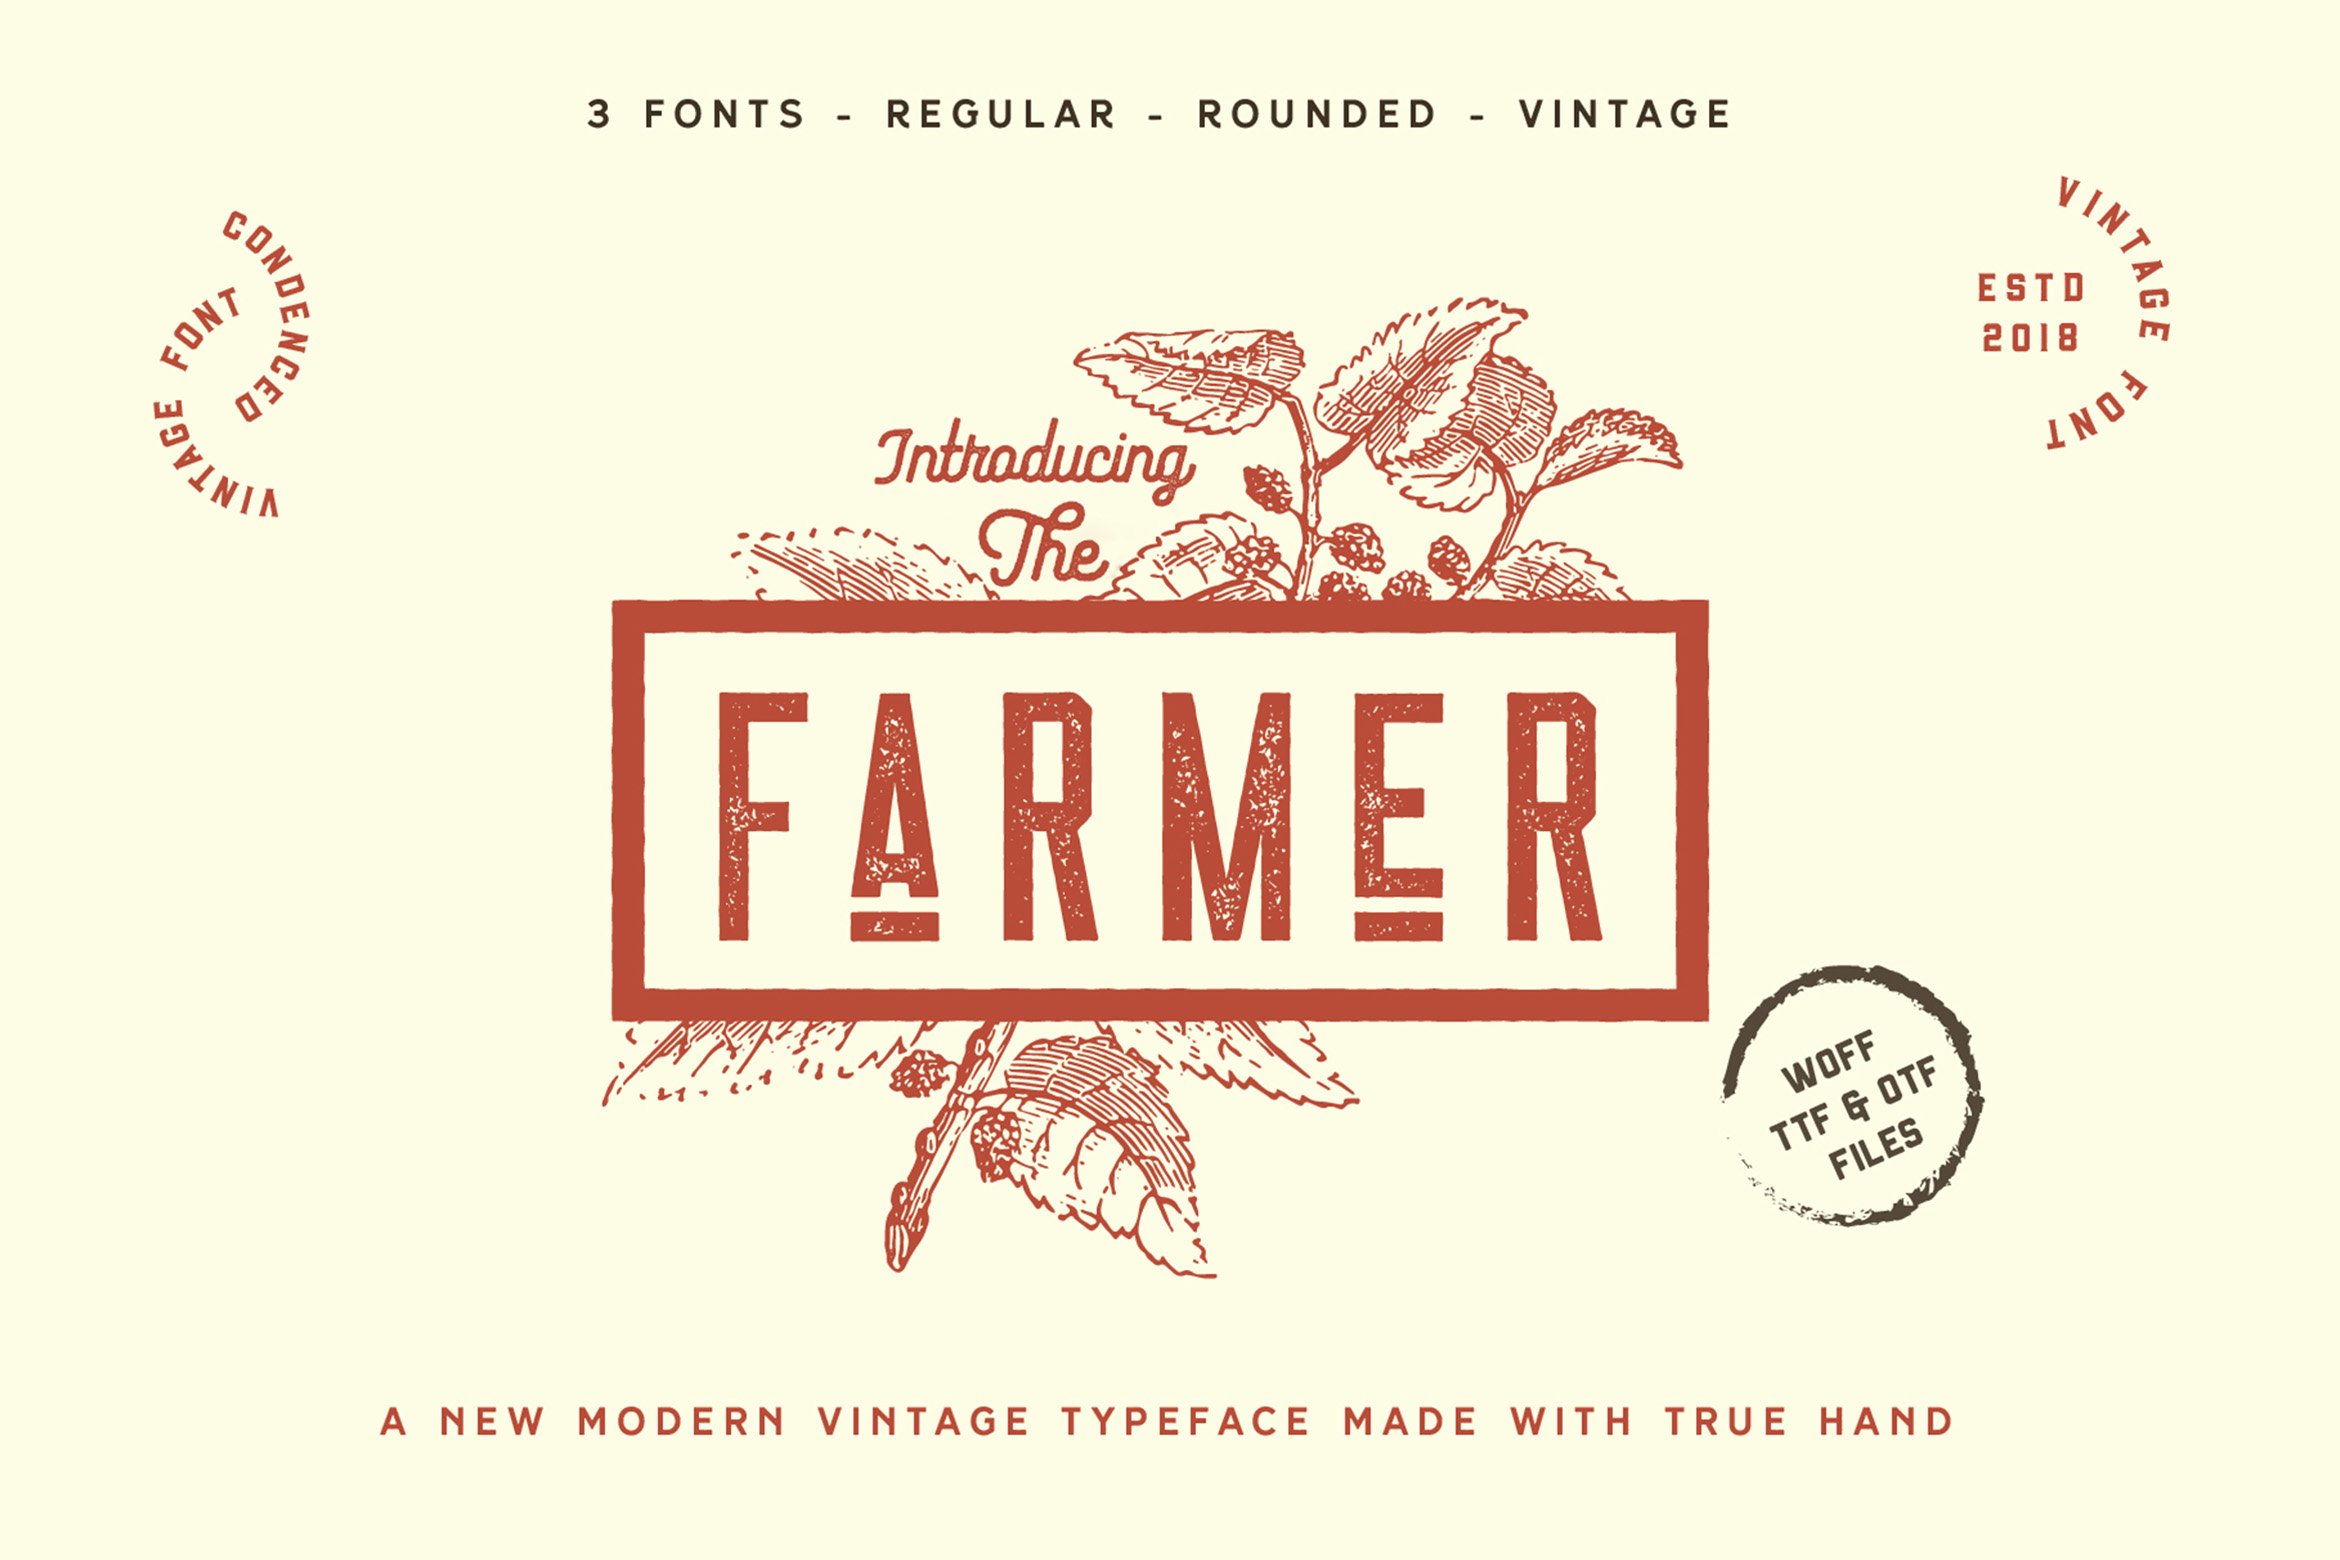 The Farmer Font - Condensed Typeface cover image.